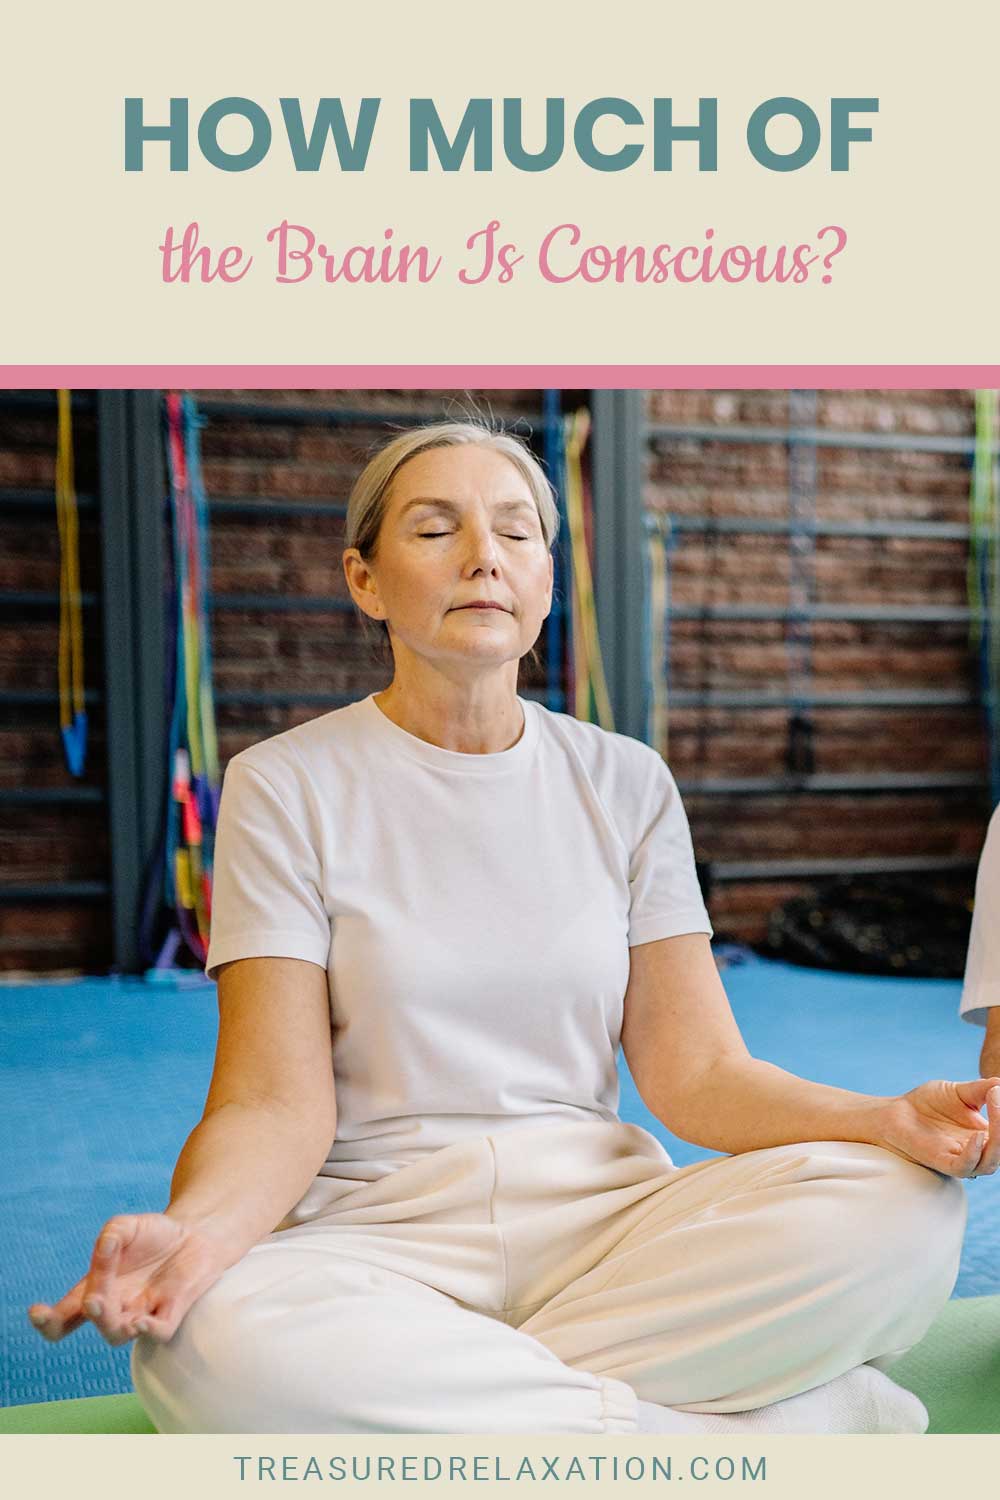 How Much of the Brain Is Conscious?